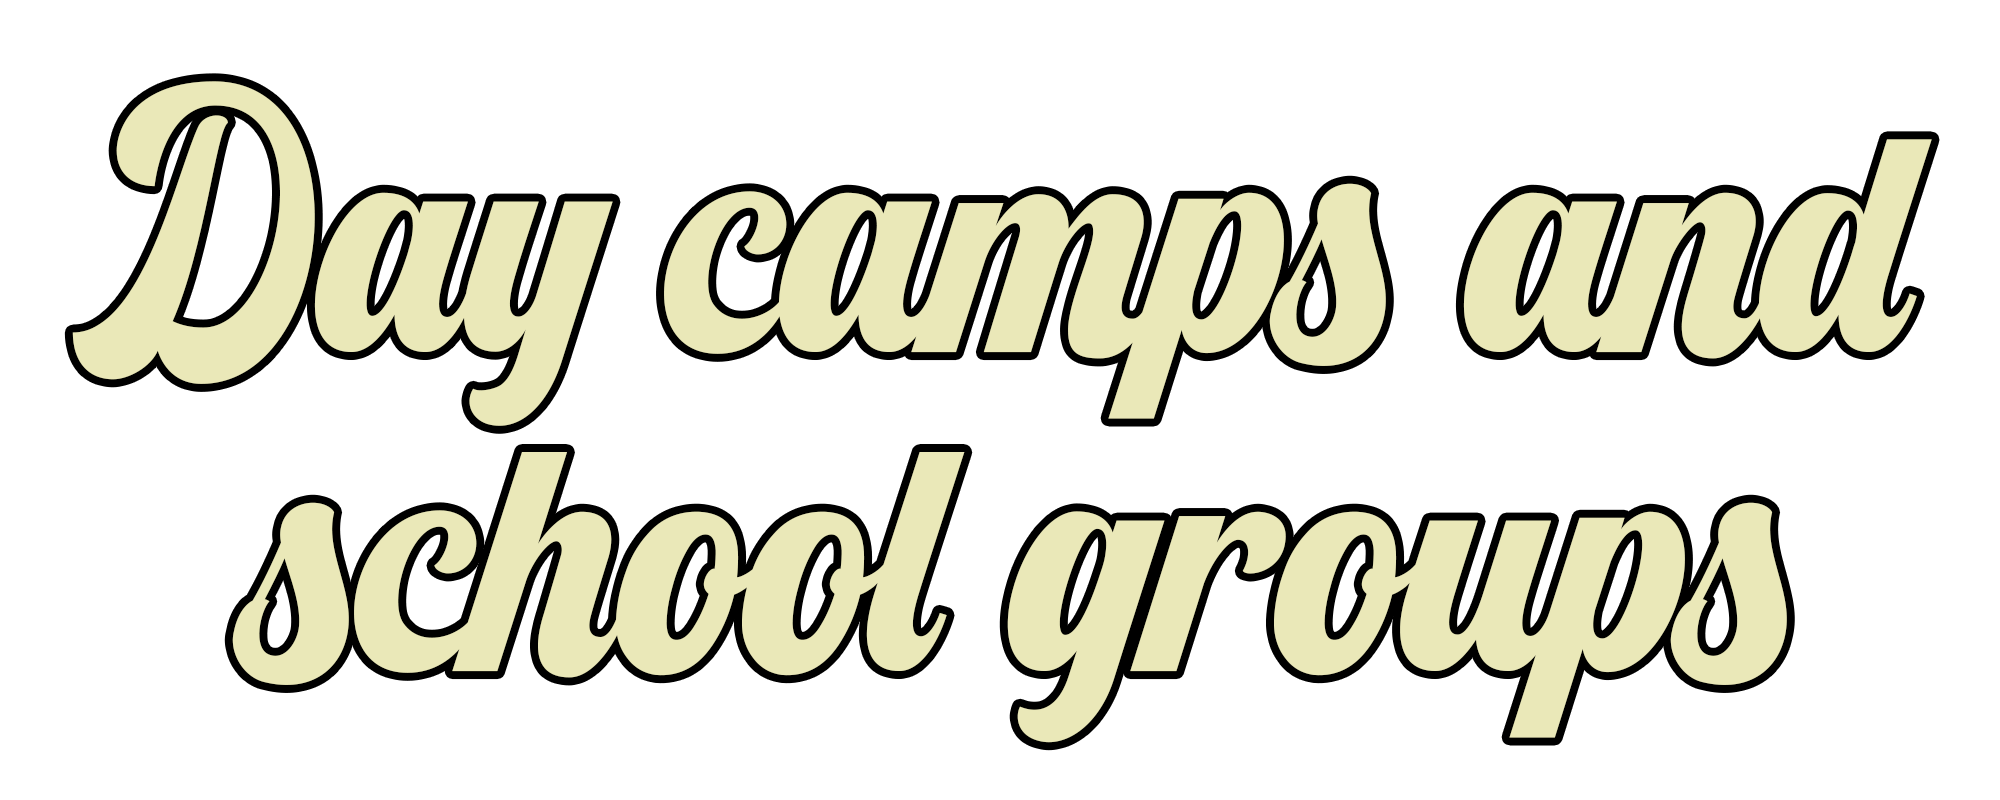 day camps school groups